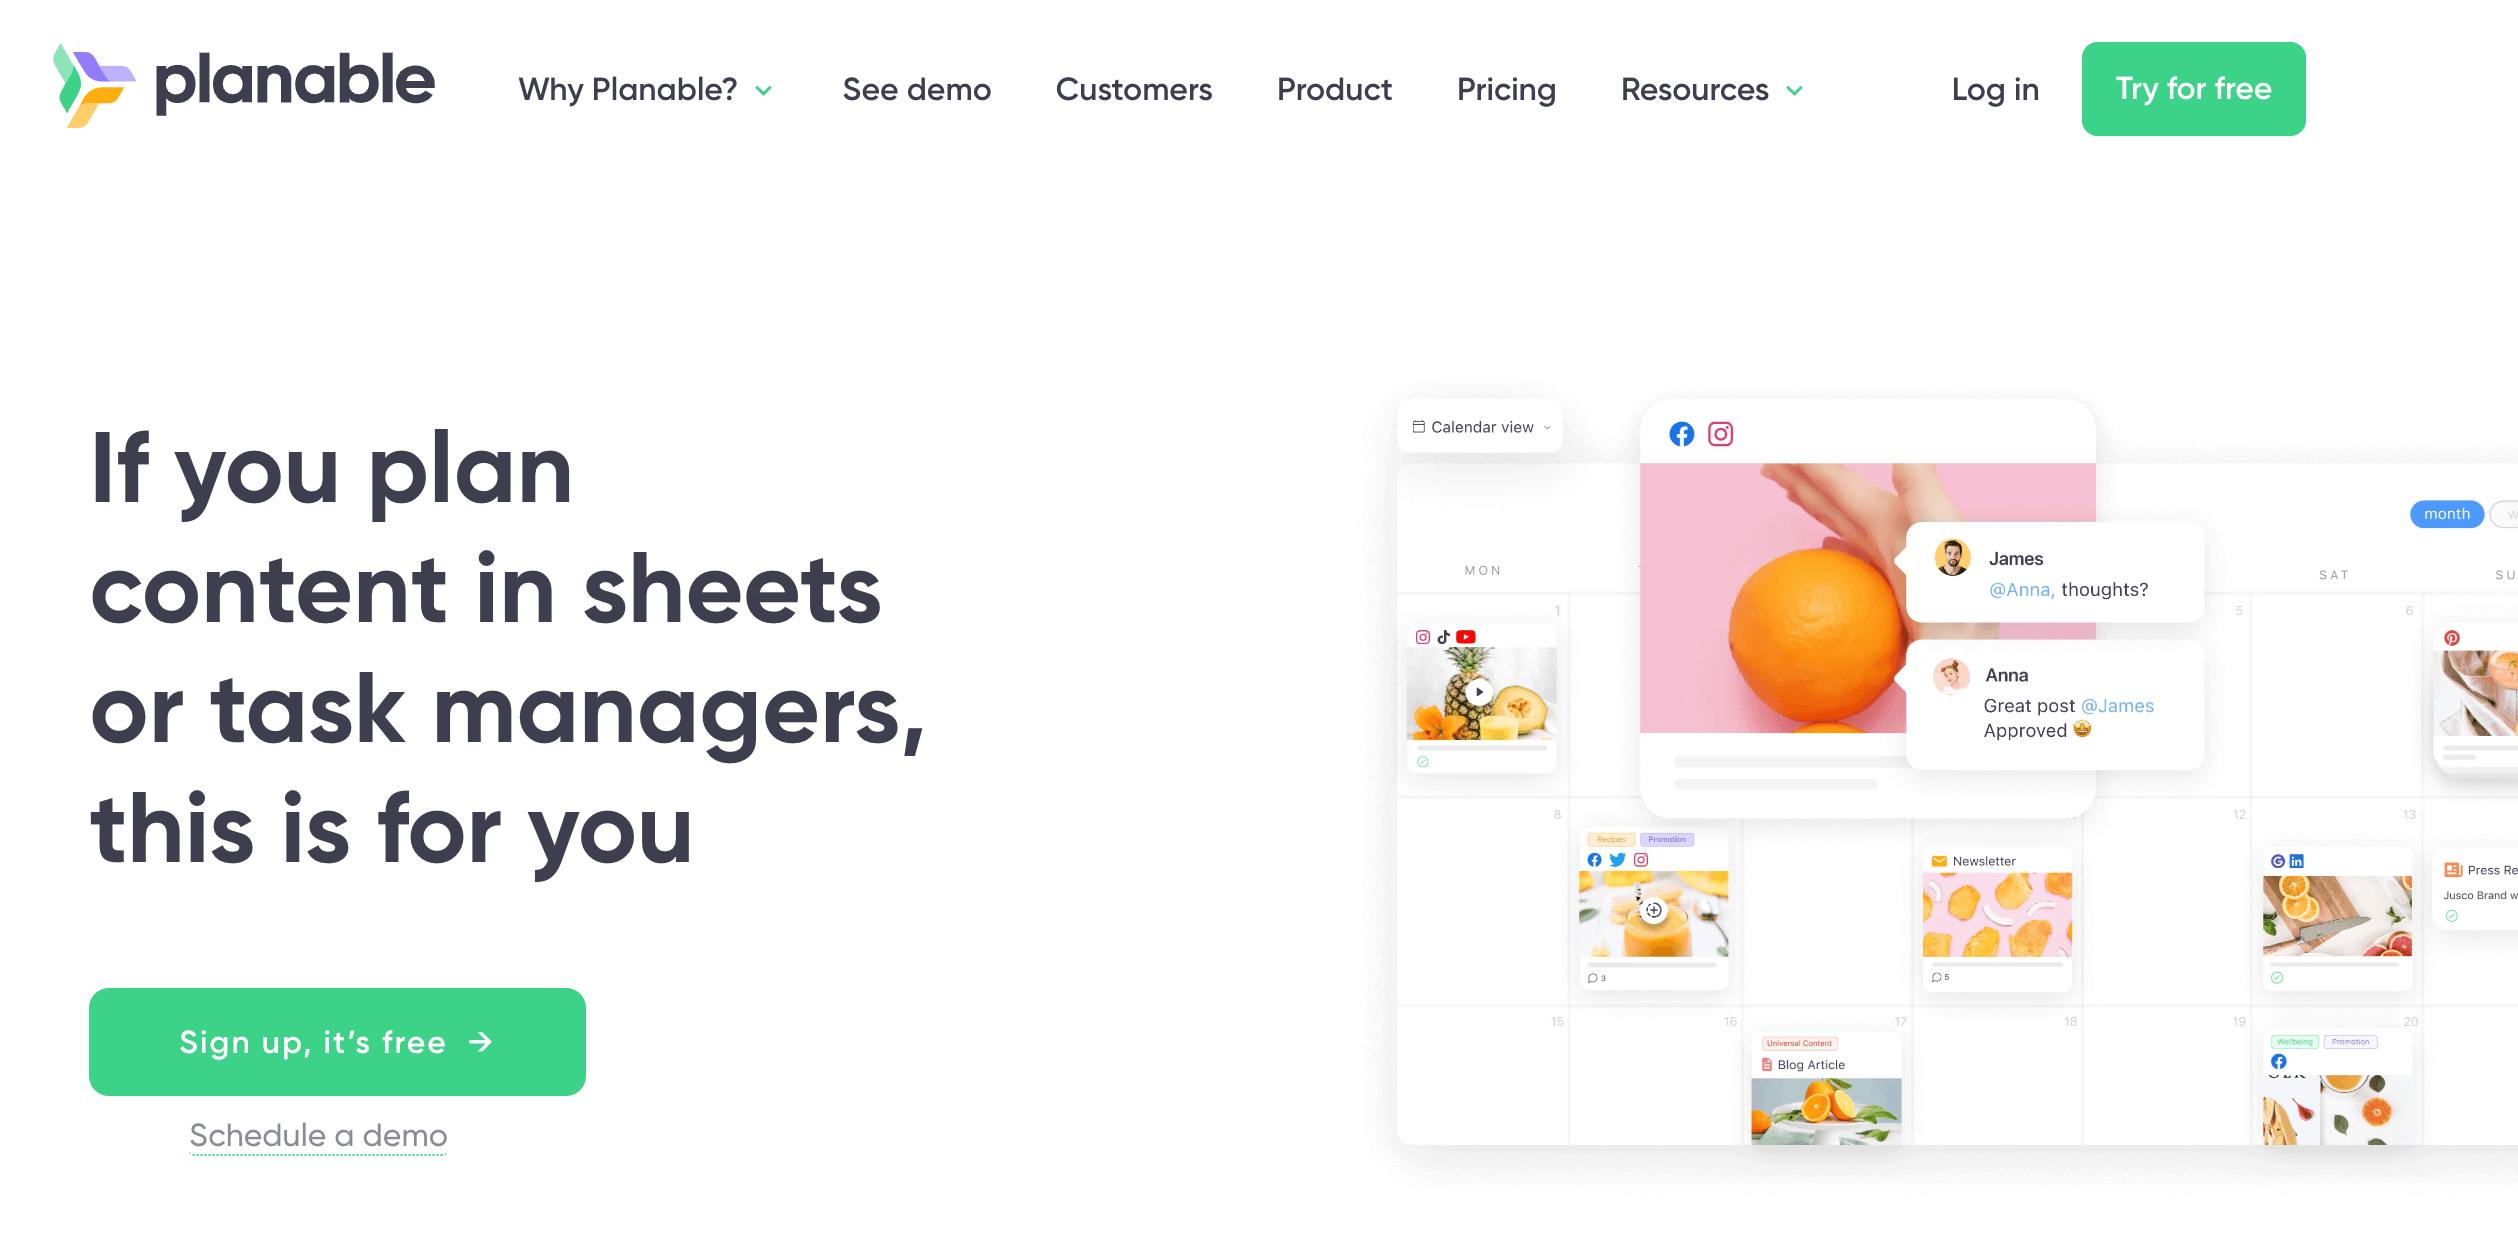 Planable homepage highlighting it as a useful project collaboration tool for those who plan content in sheets or task managers. 